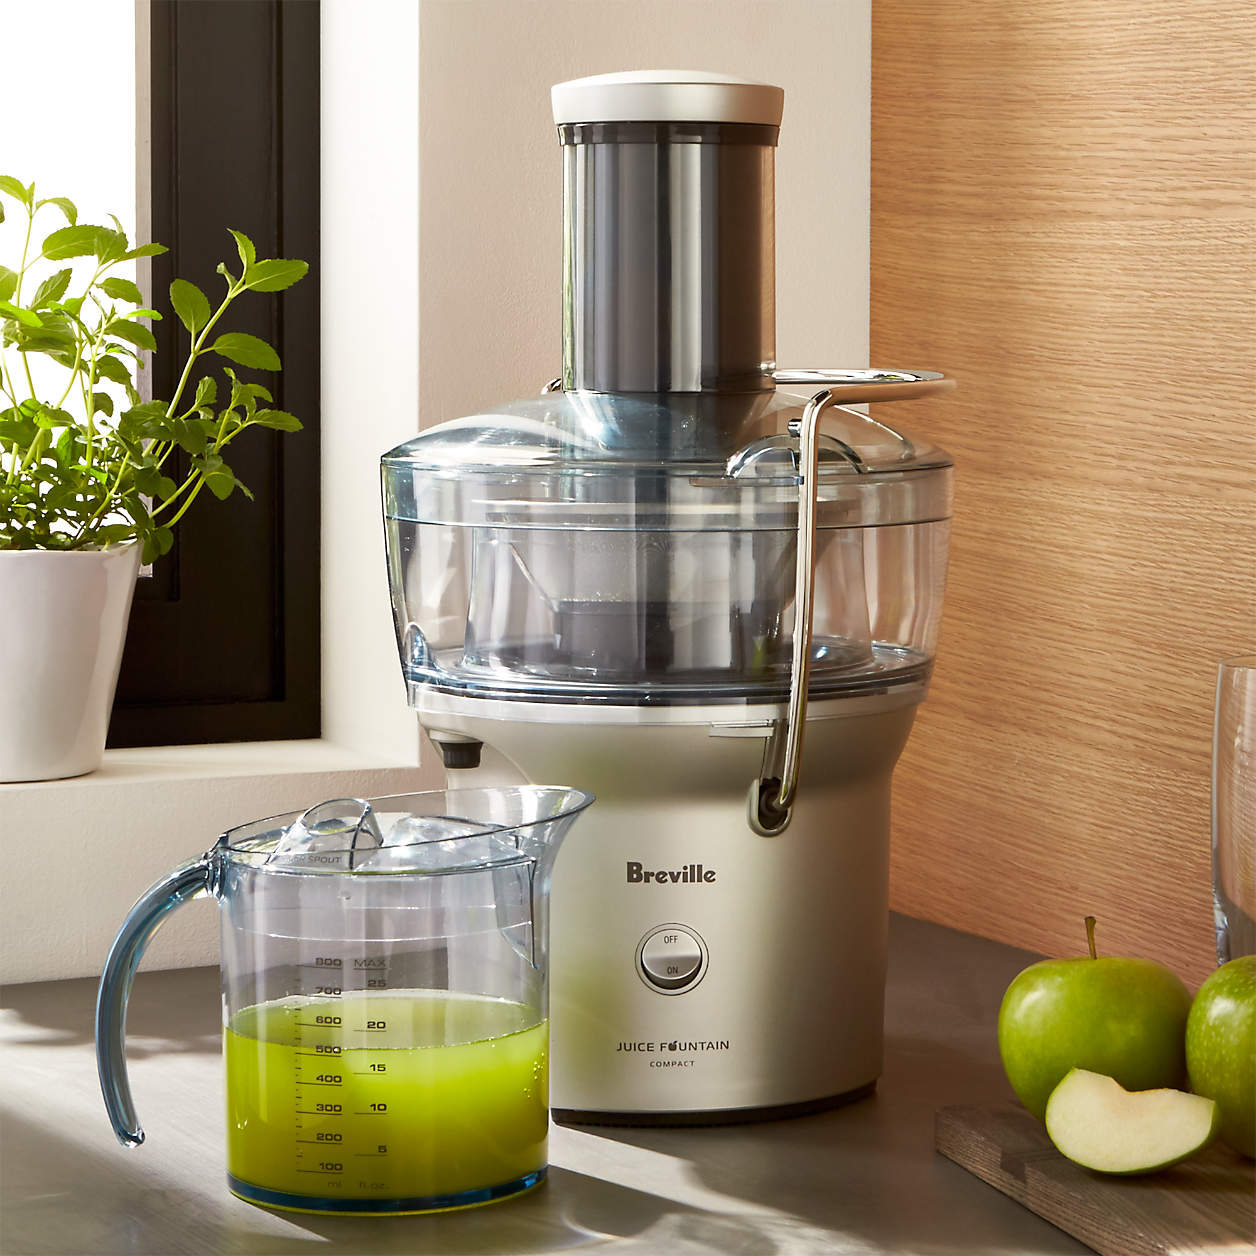 Which Breville Juicer Is The Best